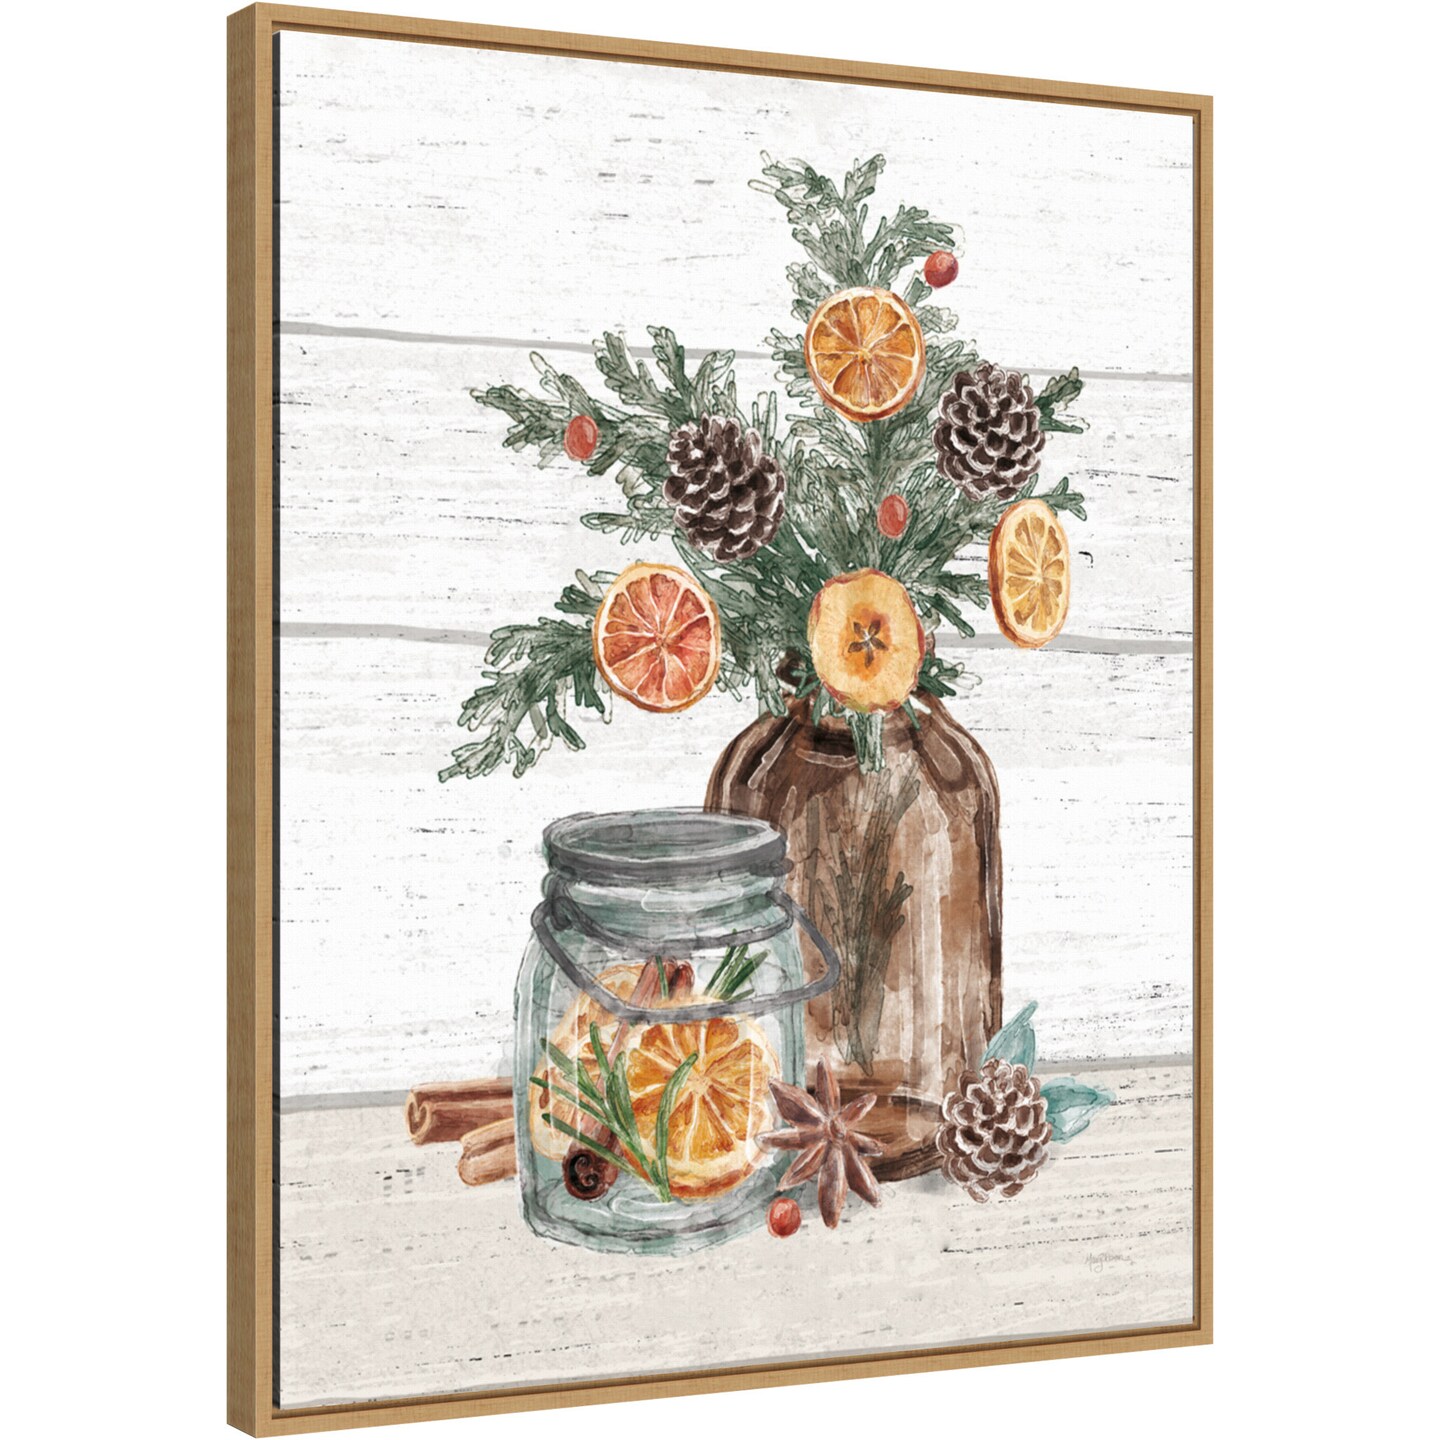 Seasonal Market II by Mary Urban 23-in. W x 28-in. H. Canvas Wall Art Print Framed in Natural